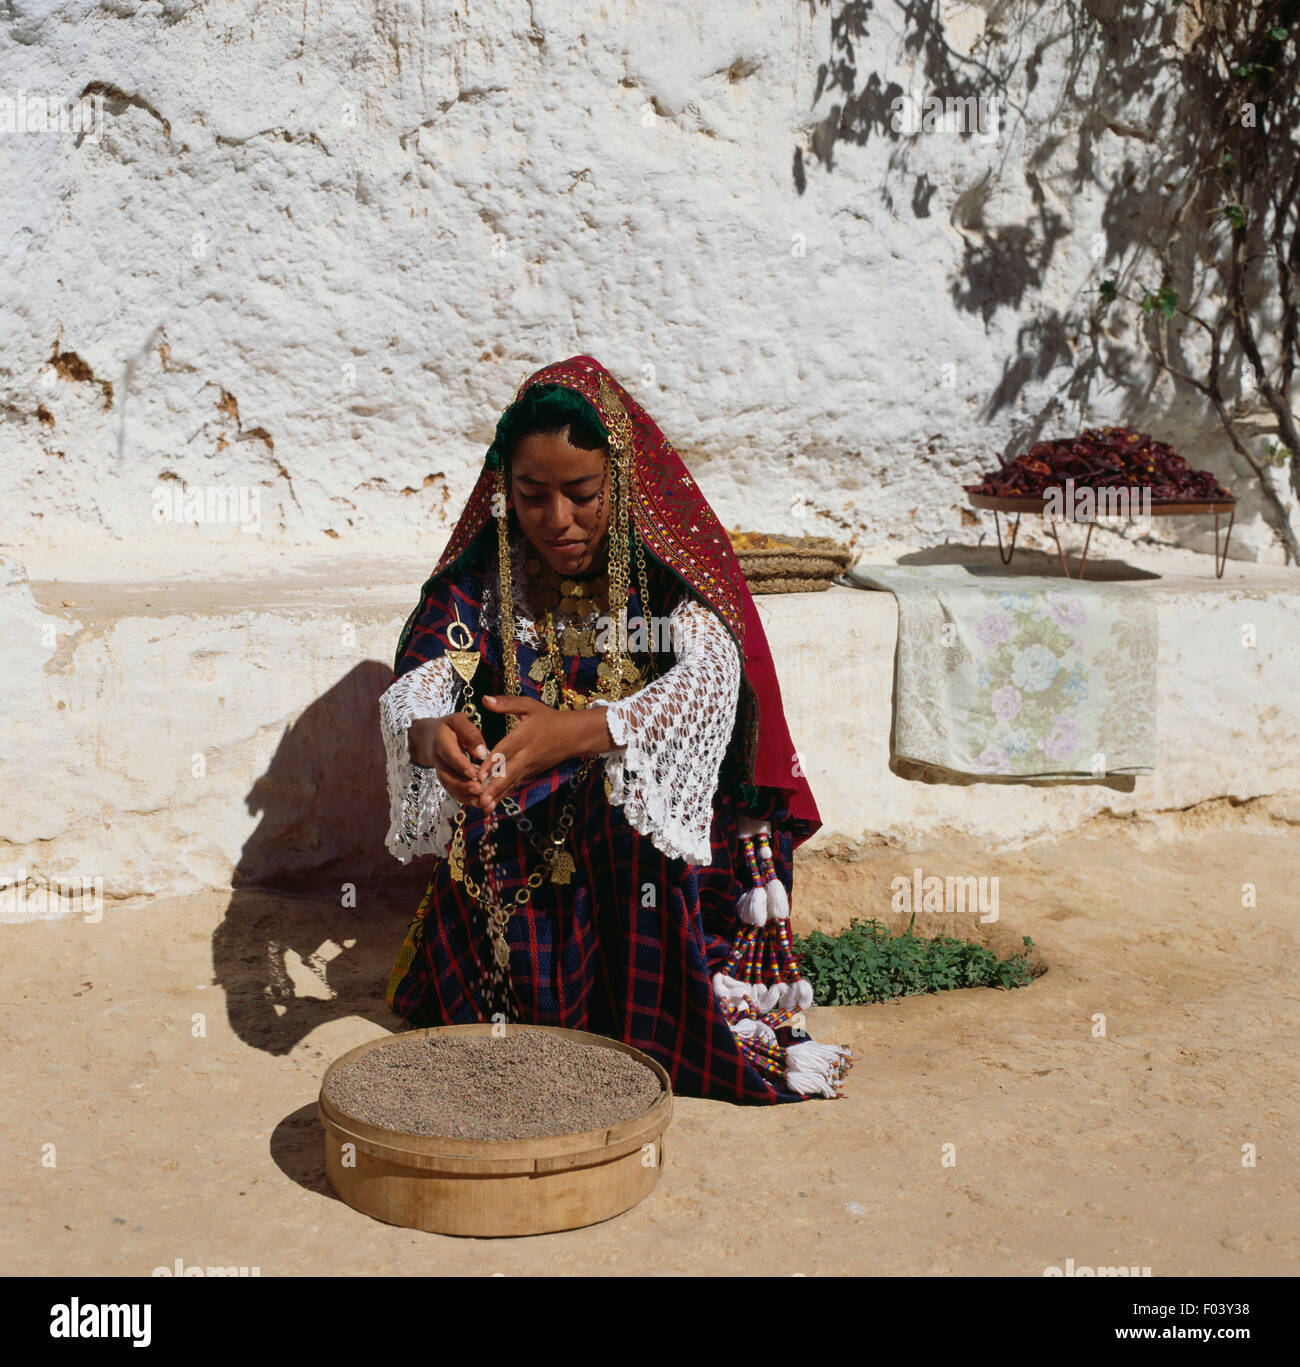 Berber girl in traditional clothes with a sieve, Matmata, Tunisia. Stock Photo